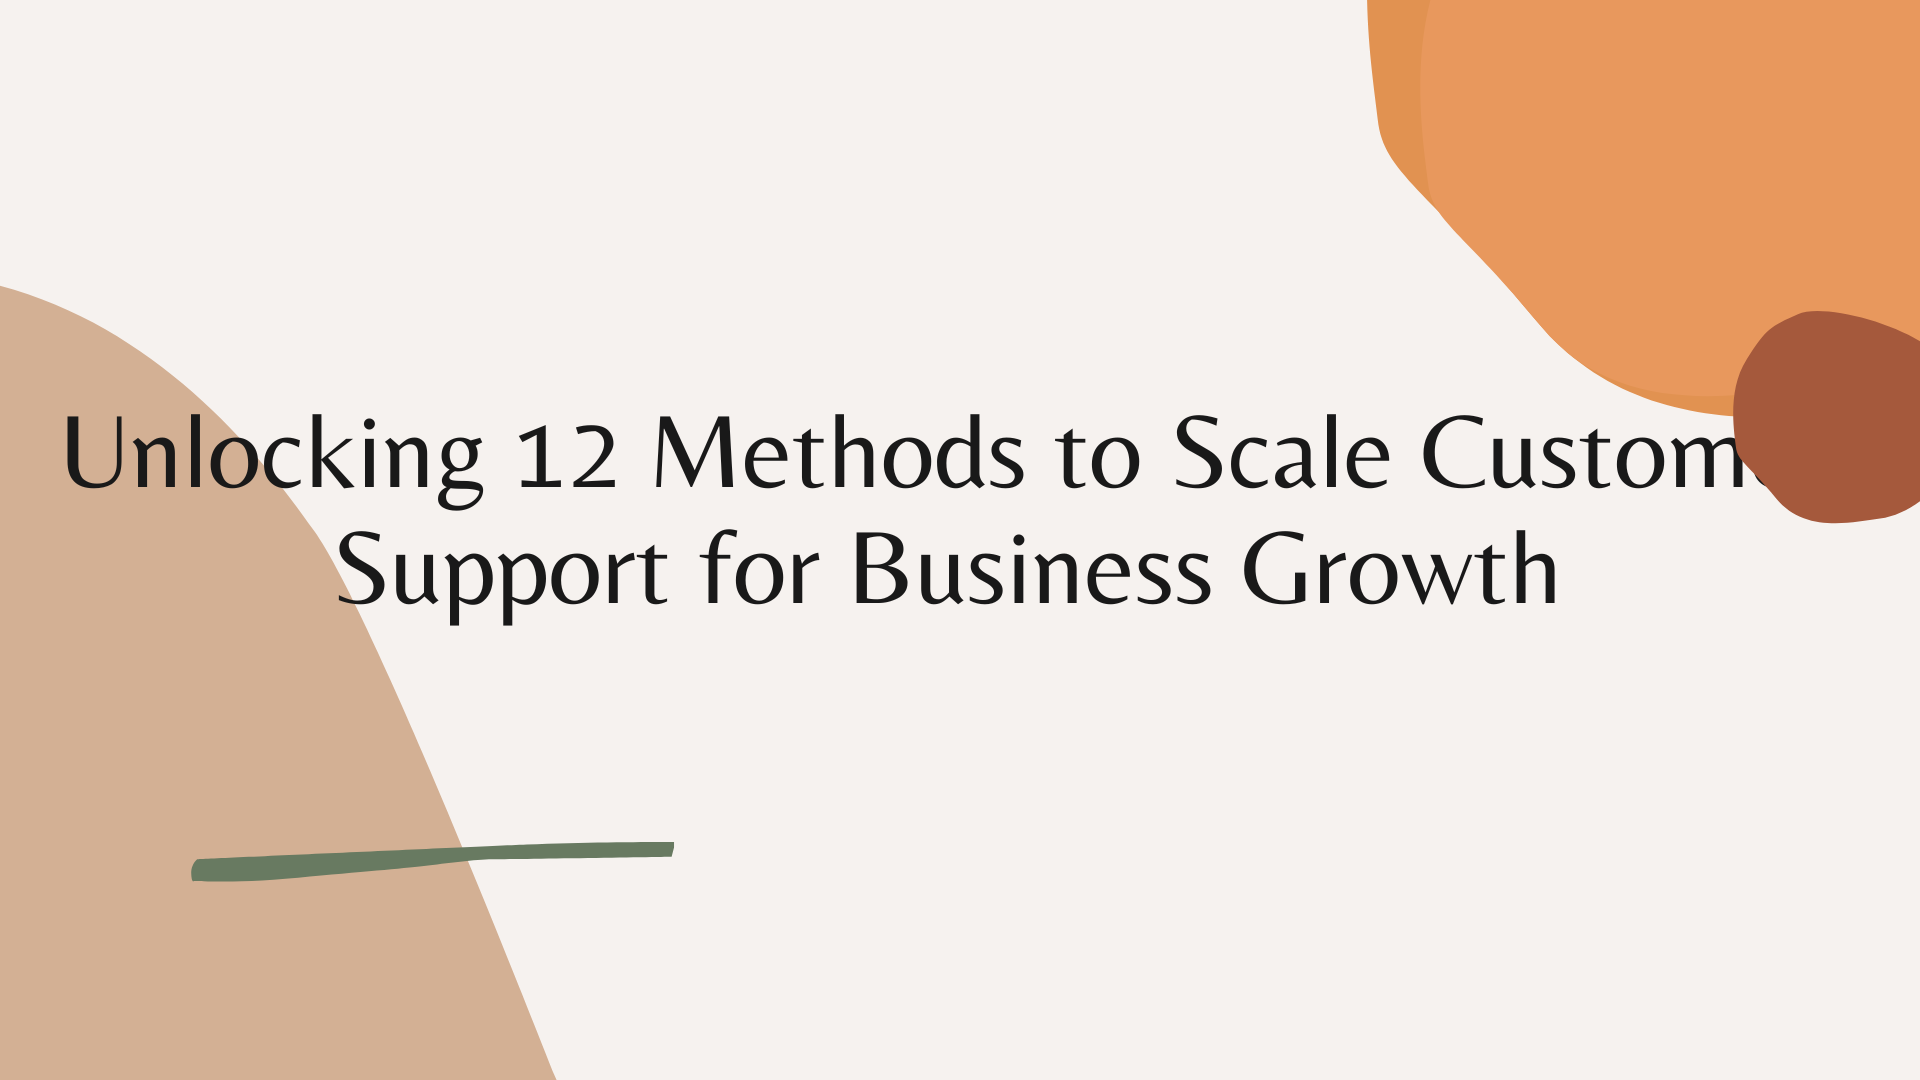 Unlocking 12 Methods to Scale Customer Support for Business Growth